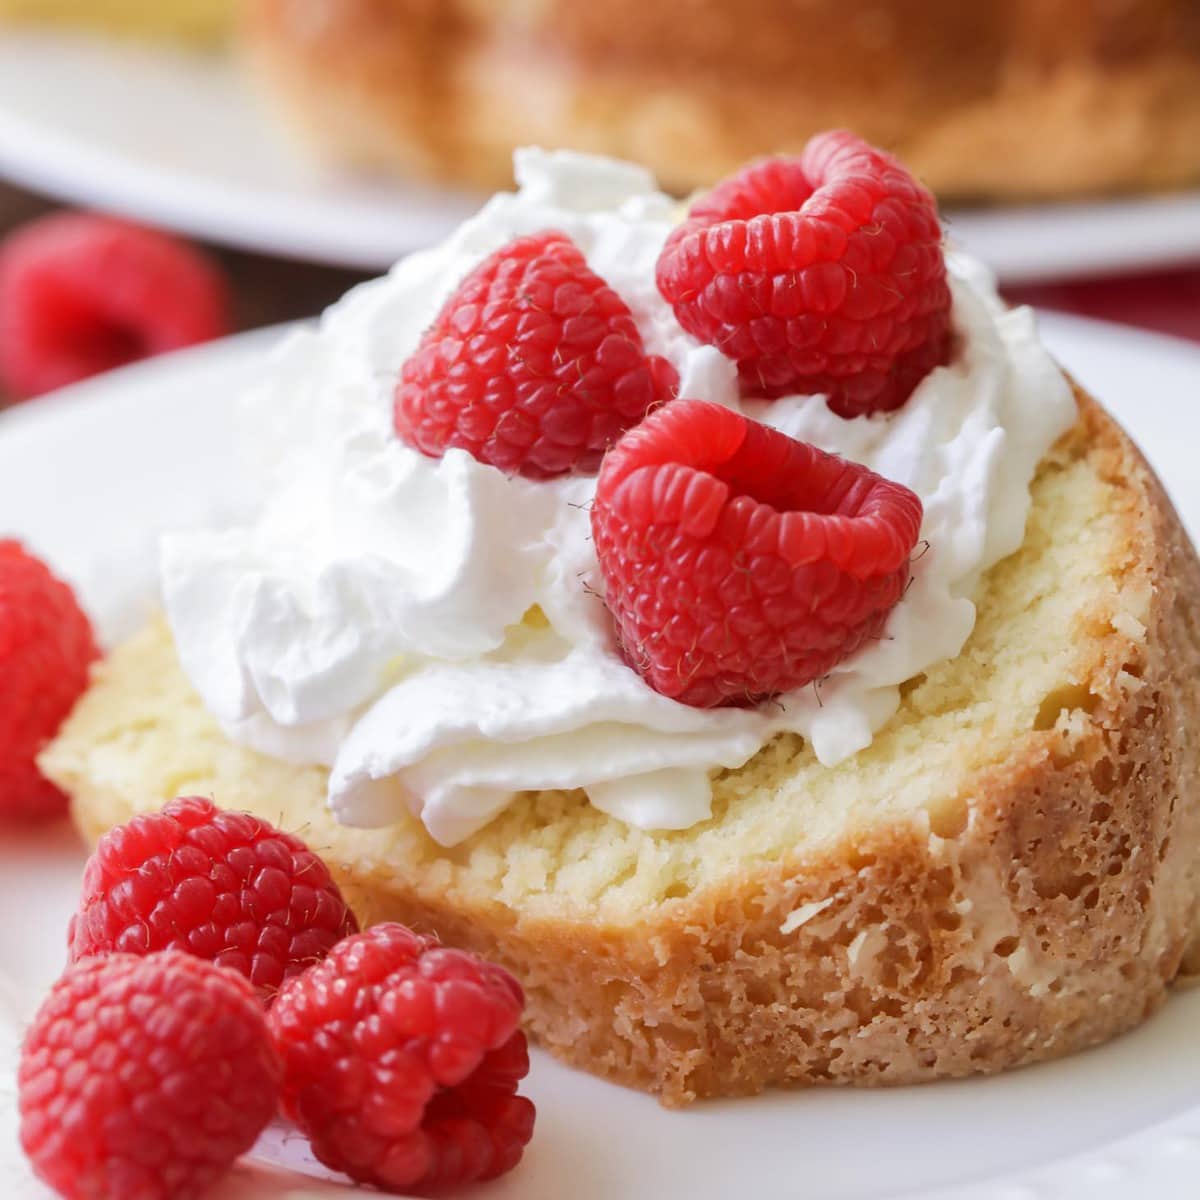 a slice of homemade Pound Cake topped with whipped cream and raspberries